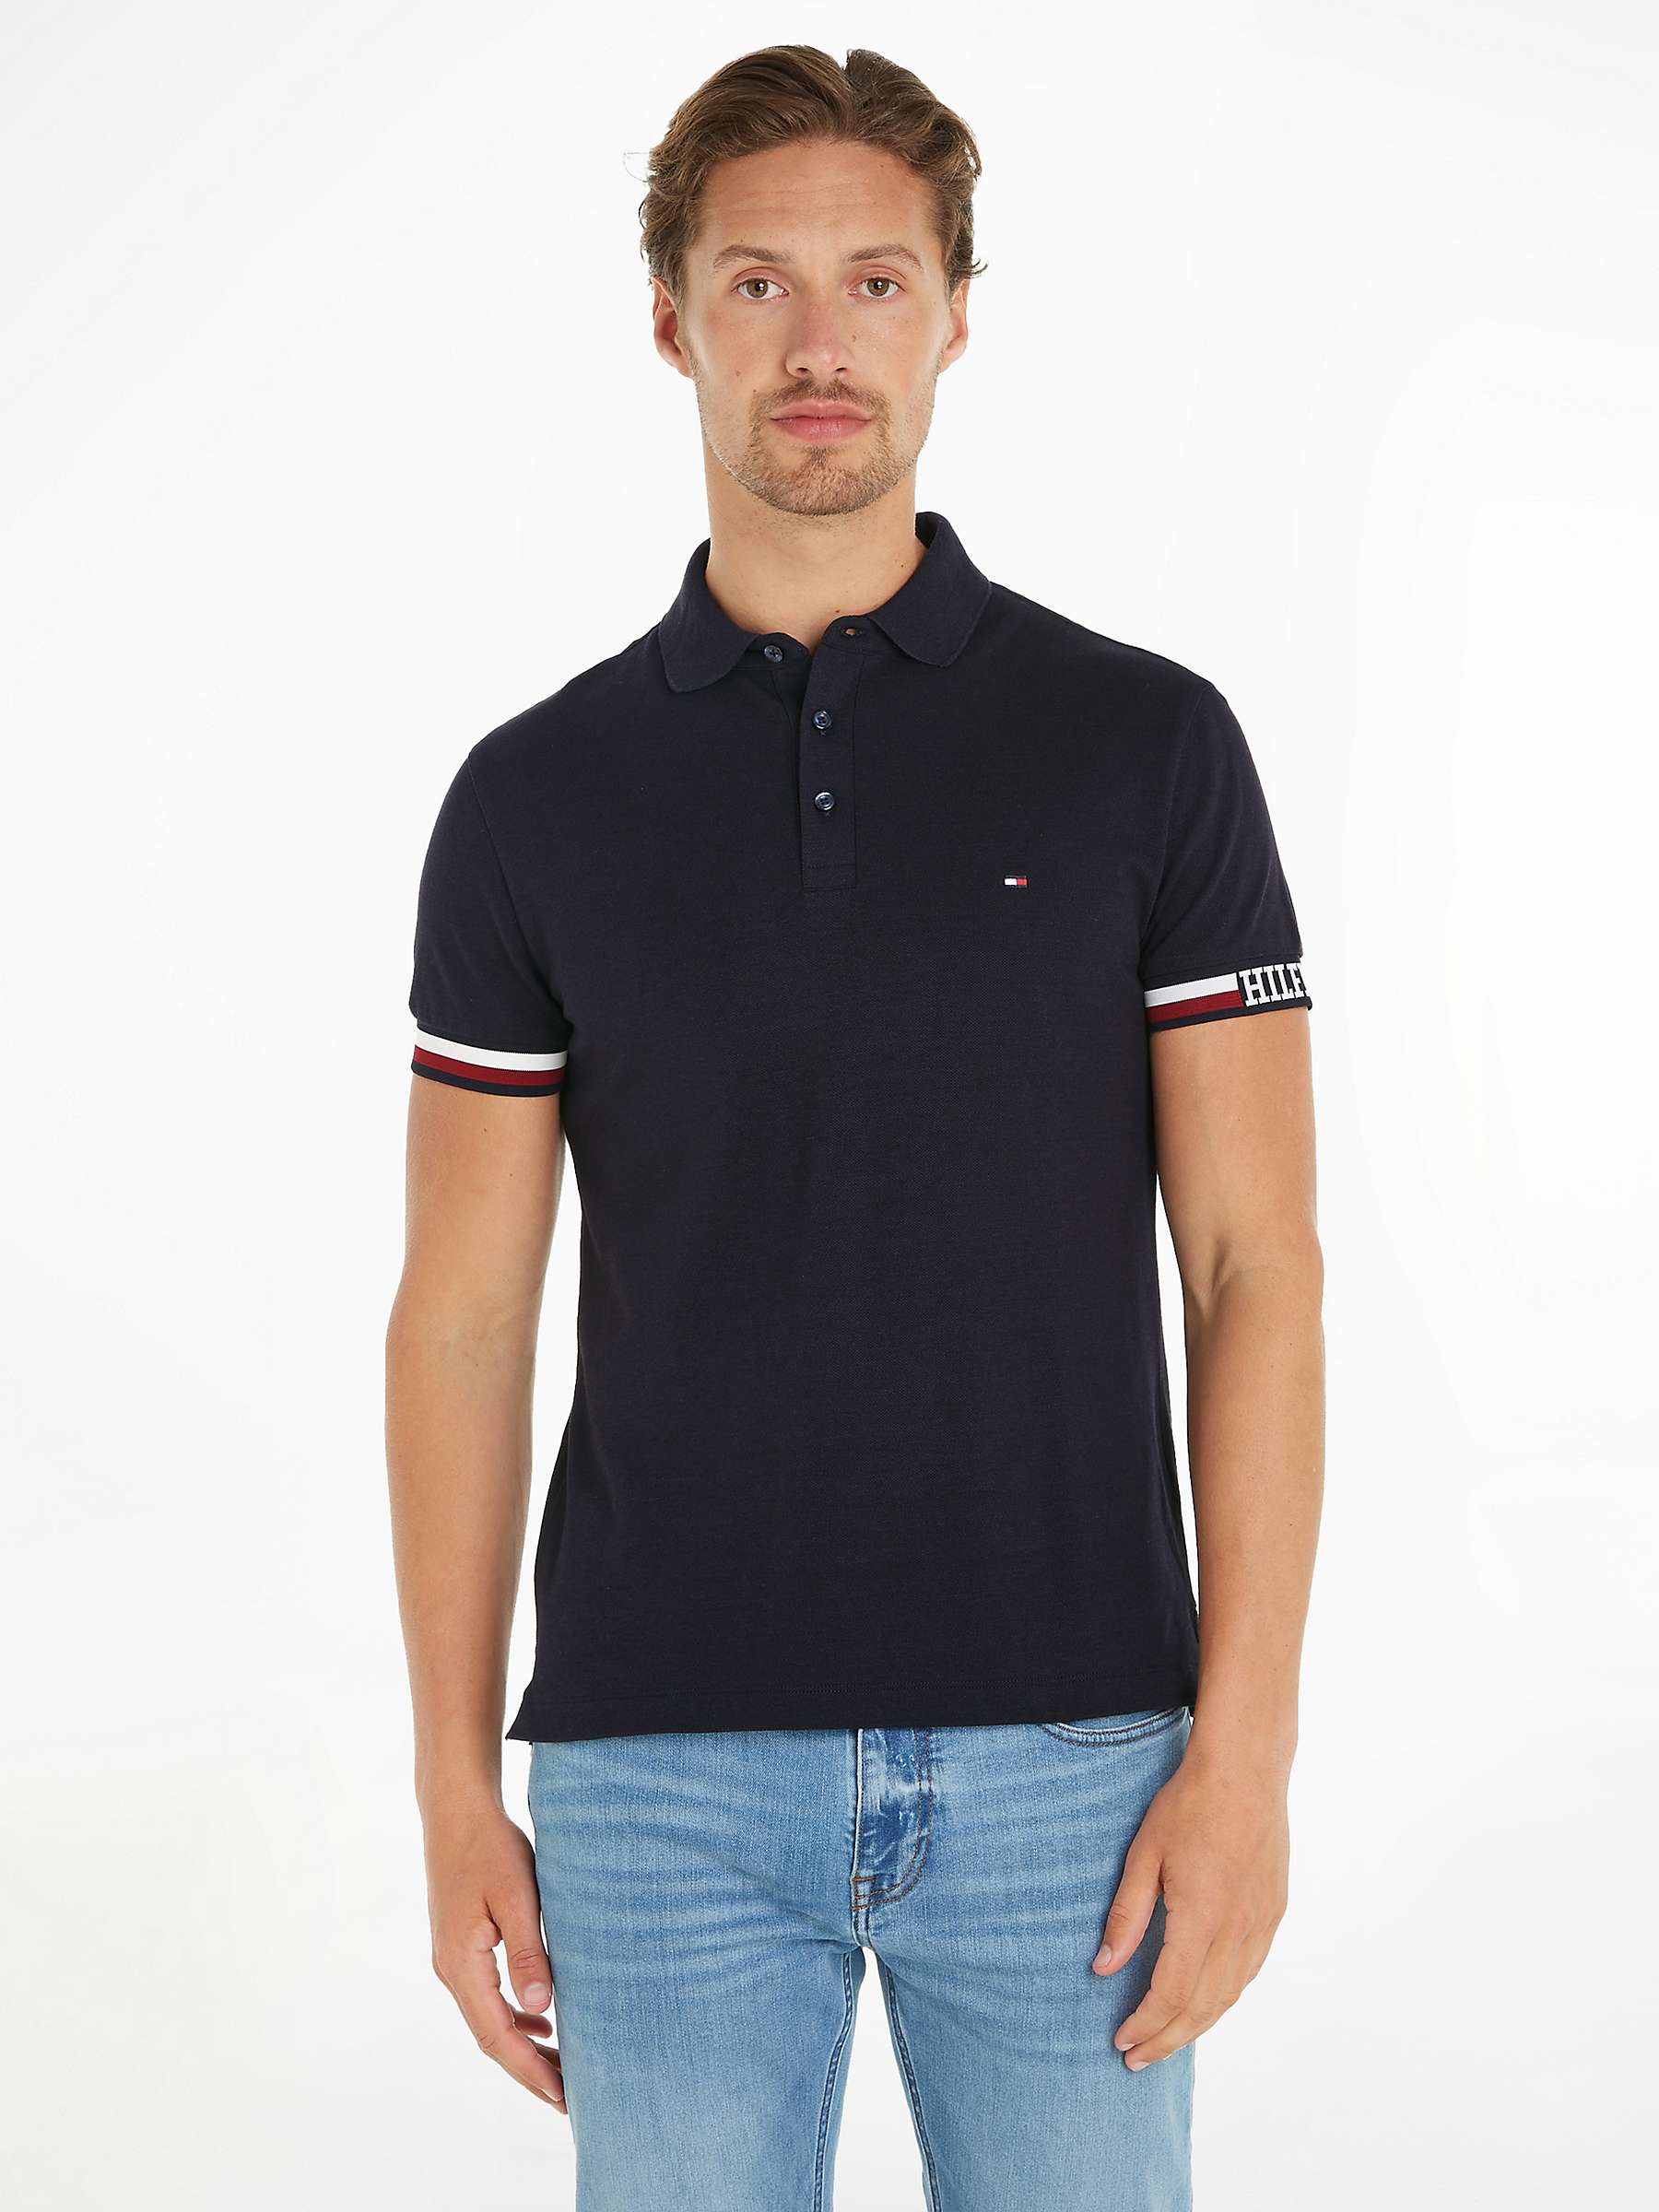 Buy Tommy Hilfiger Monotype Slim Fit Polo Top Online at johnlewis.com